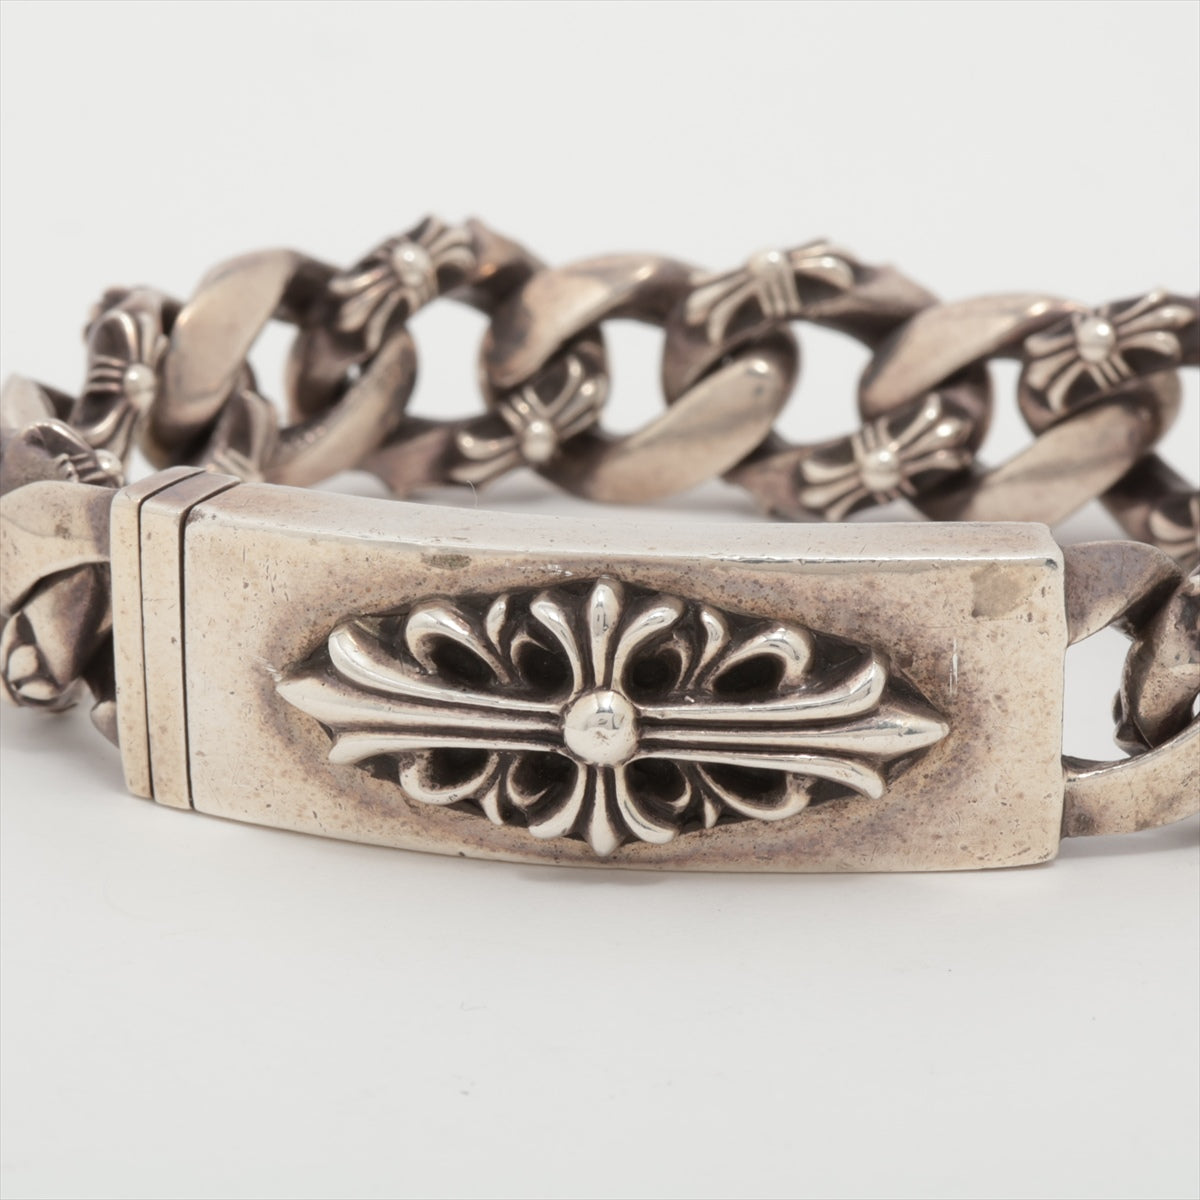 Chrome Hearts Floral Cross ID Bracelet 925 124.2g With invoice 13 links fancy link